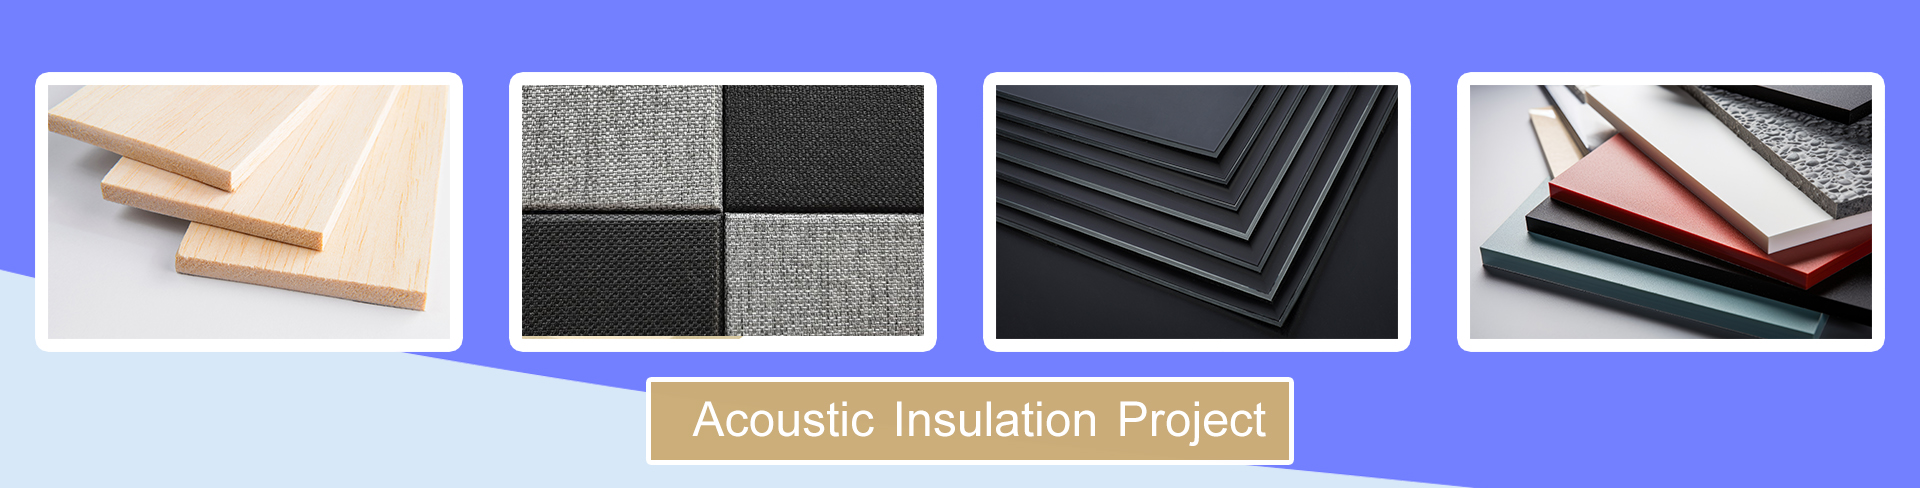 Acoustic Insulation Project